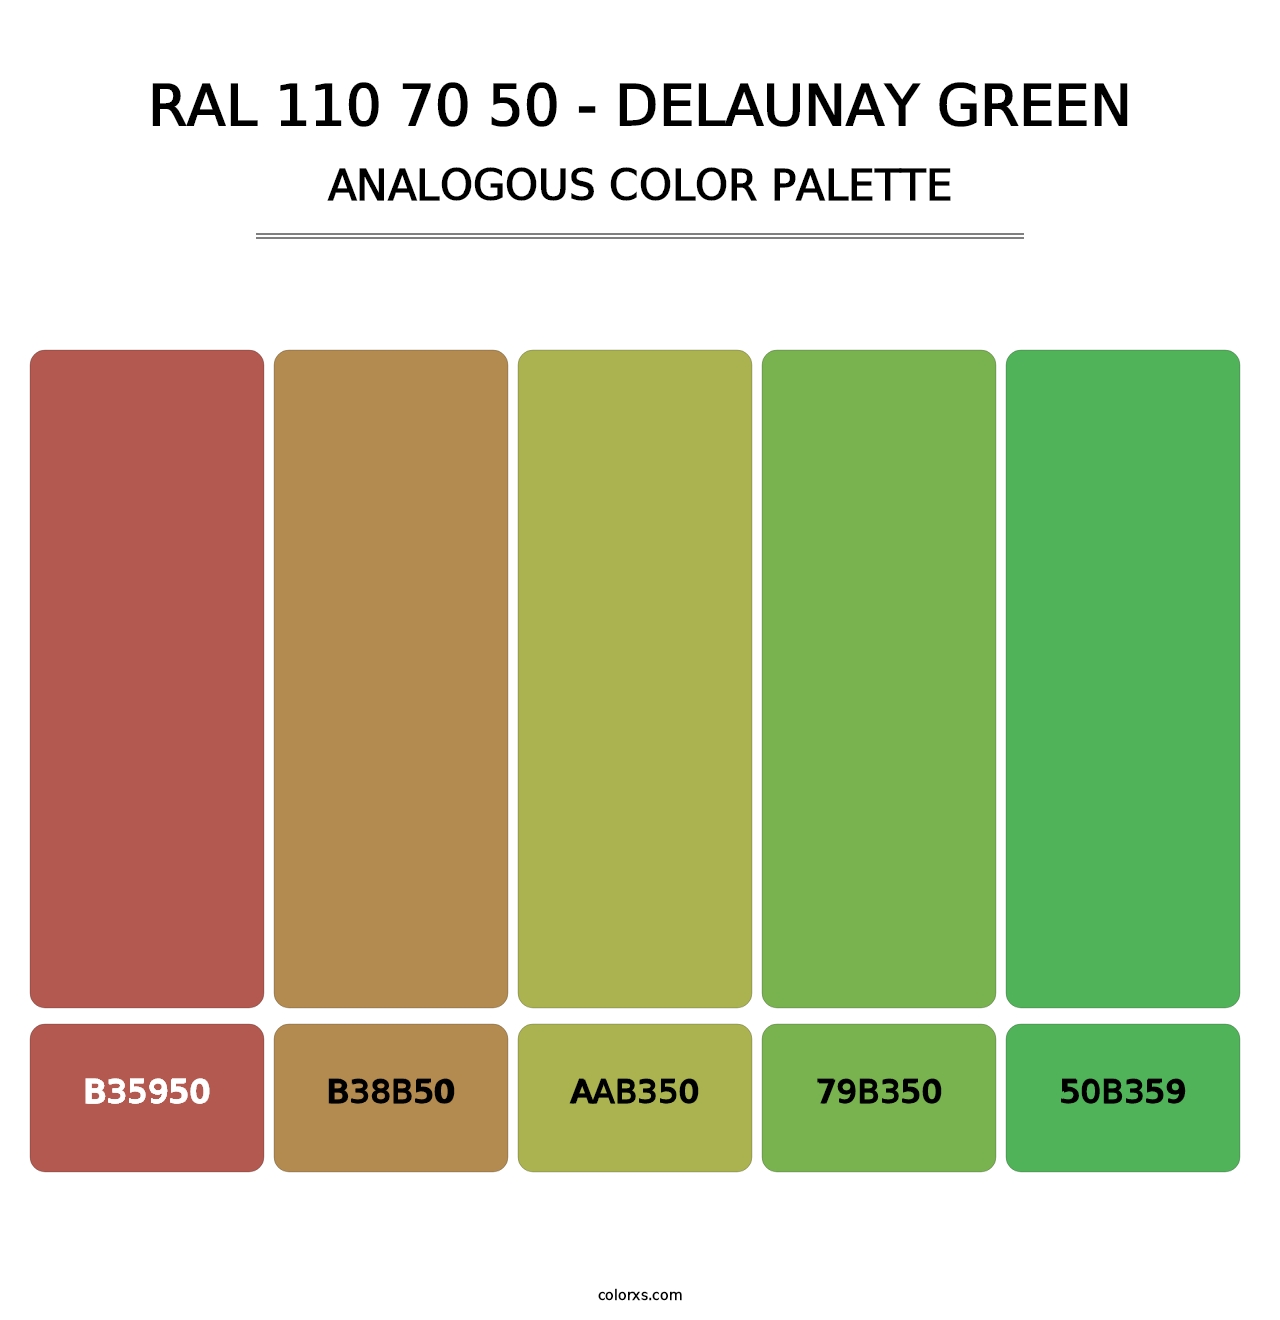 RAL 110 70 50 - Delaunay Green - Analogous Color Palette